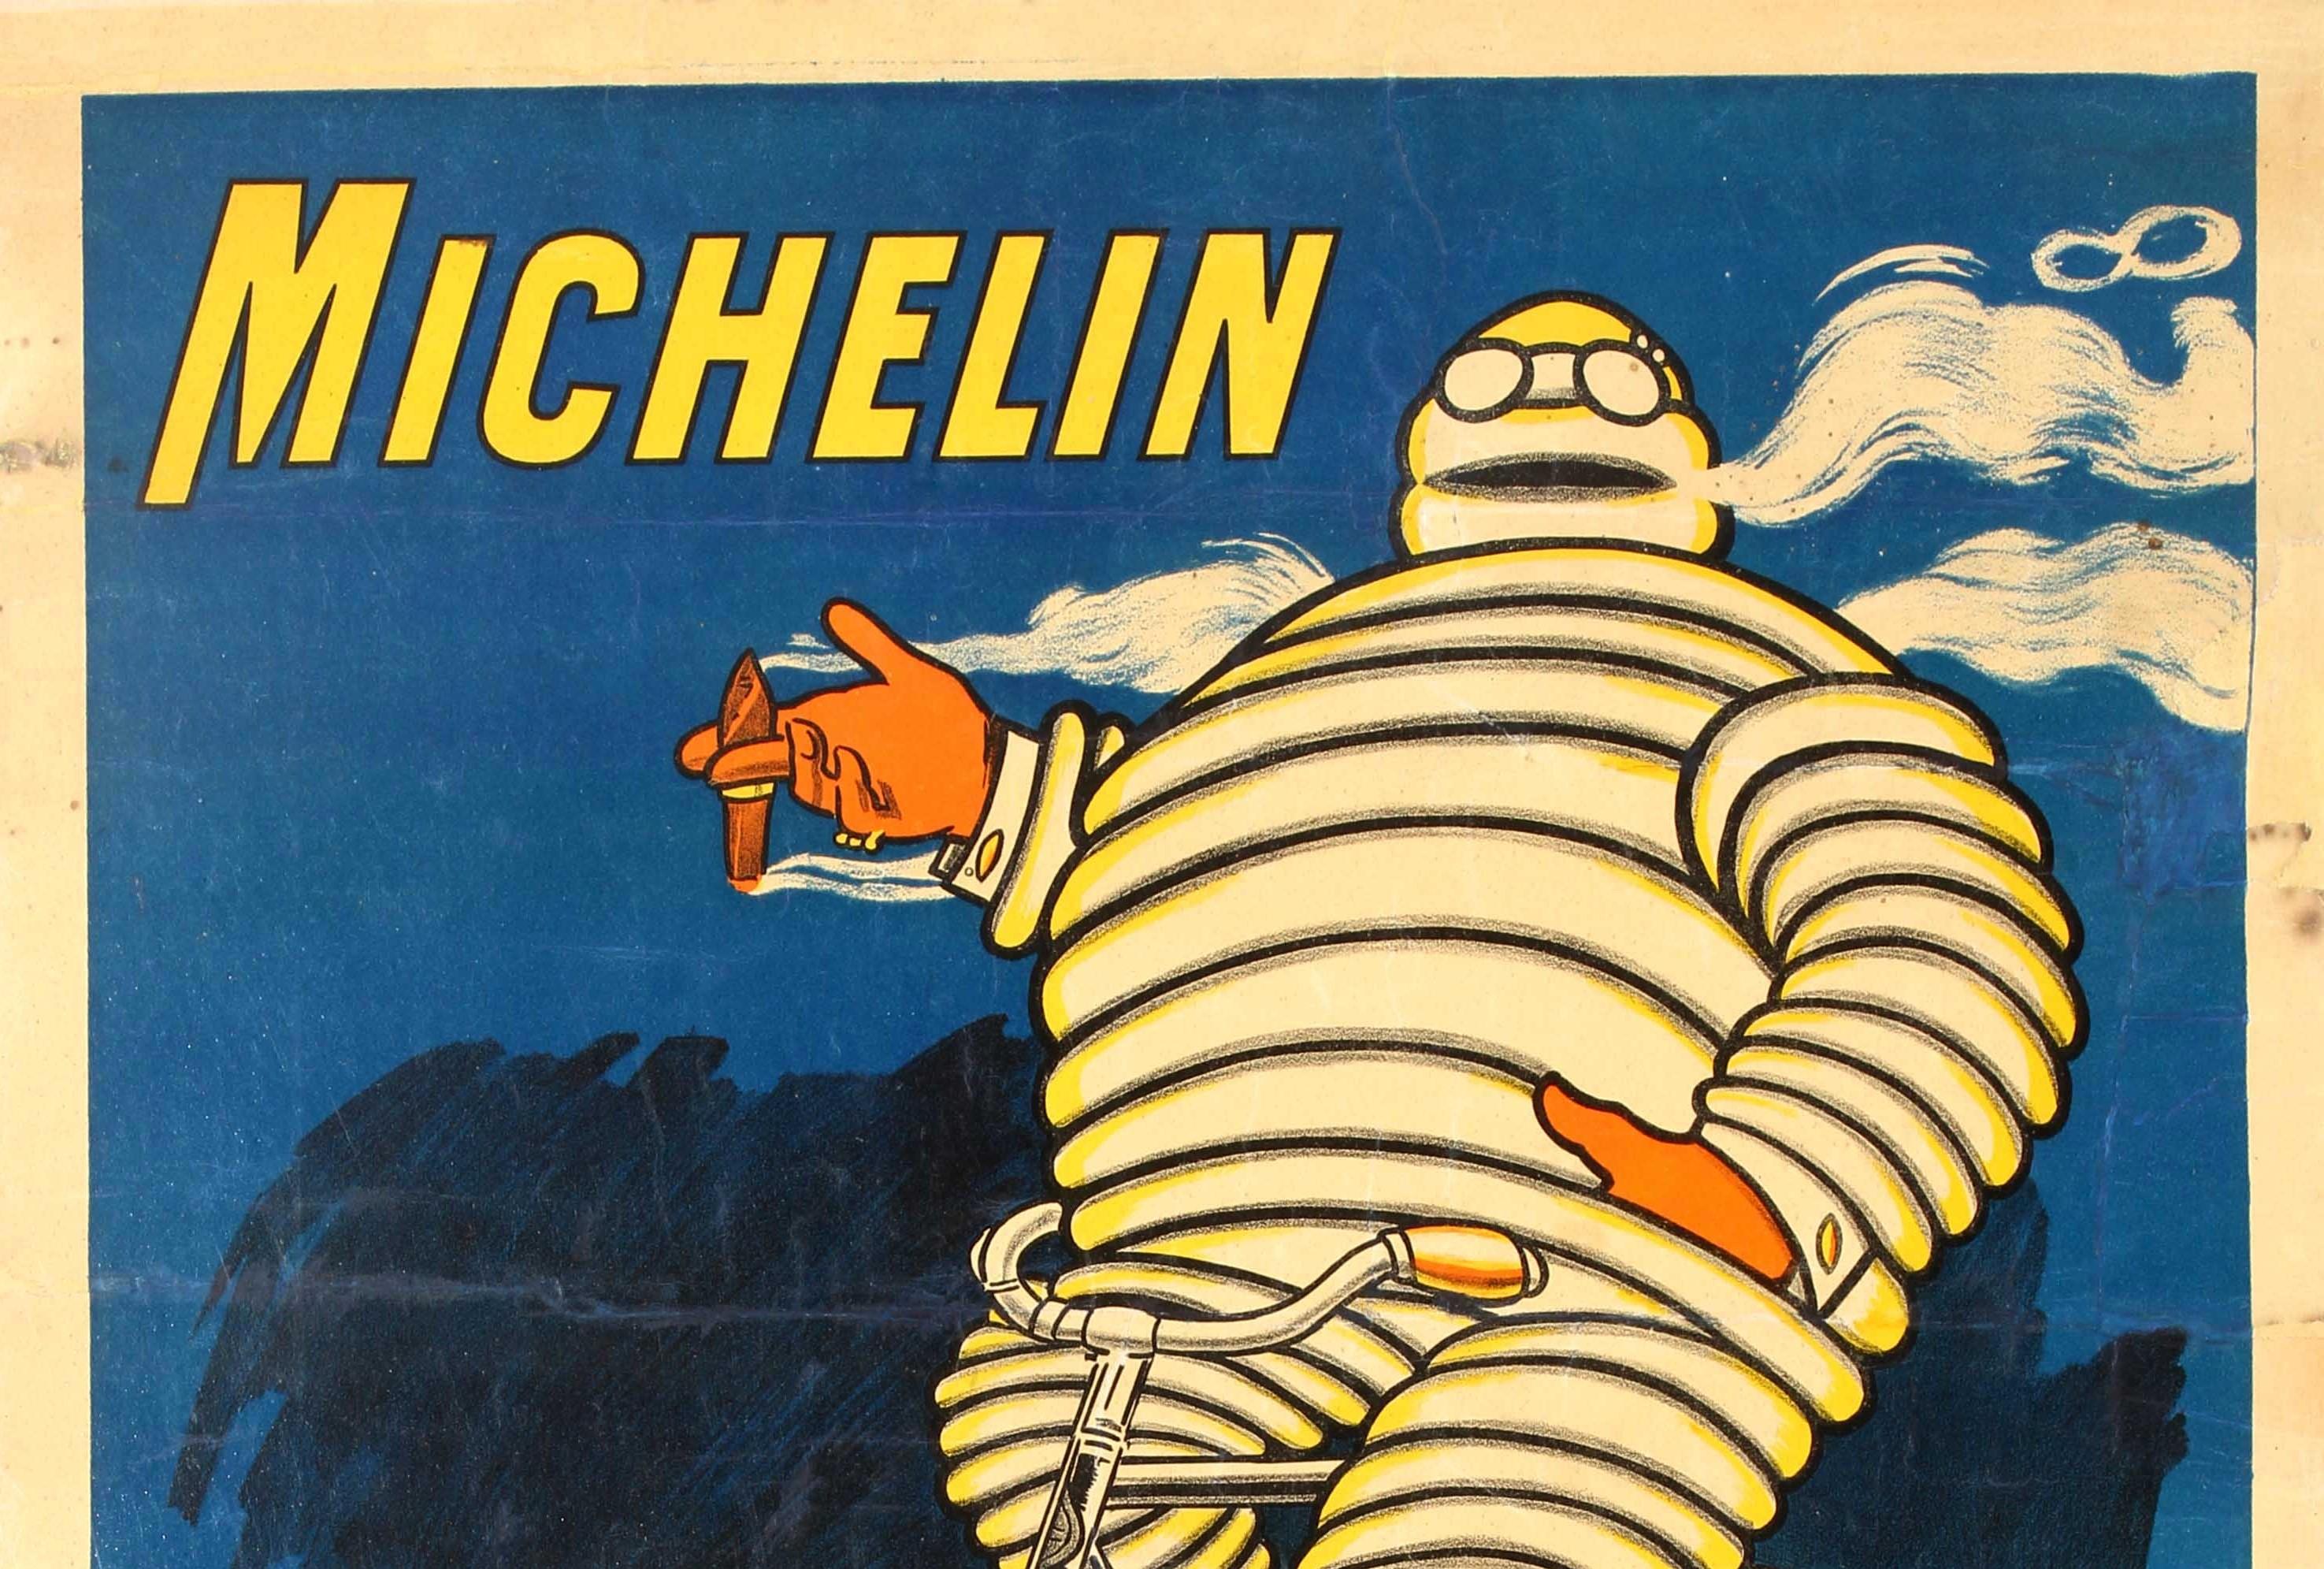 Original antique advertising poster for Michelin Pneu Velo bicycle tyres featuring a Classic illustration by the French cartoonist Marius Rossillon (known as O’Galop; 1867-1946) showing the trademark Bibendum character (the iconic Michelin Man